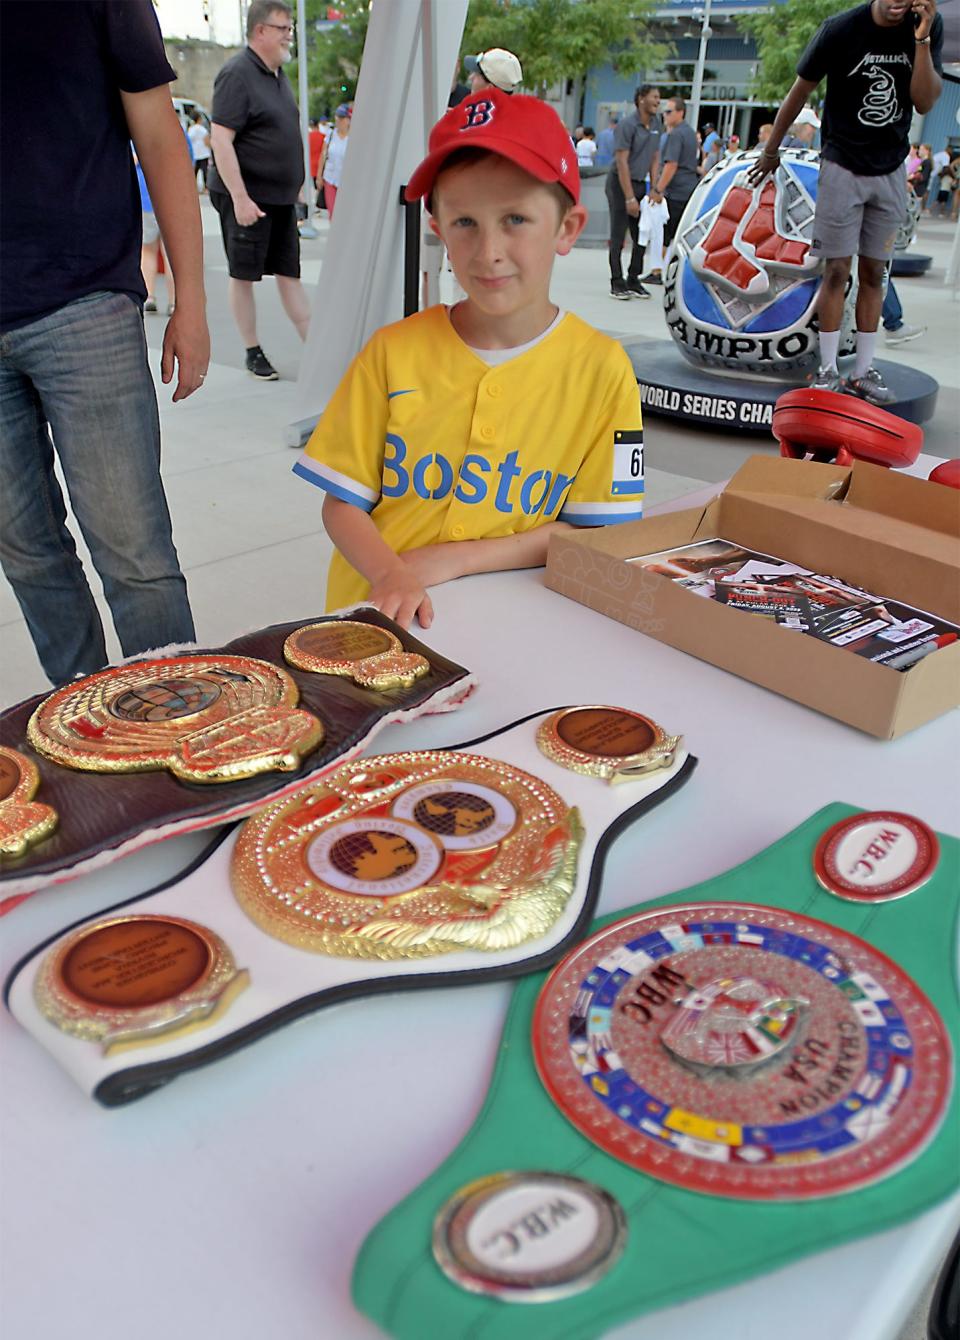 Mitchell Geher, 7, of West Newton, admires the three championship belts held by Worcester's Kendrick Ball Jr. while watching boxers working out last week in front of Polar Park.